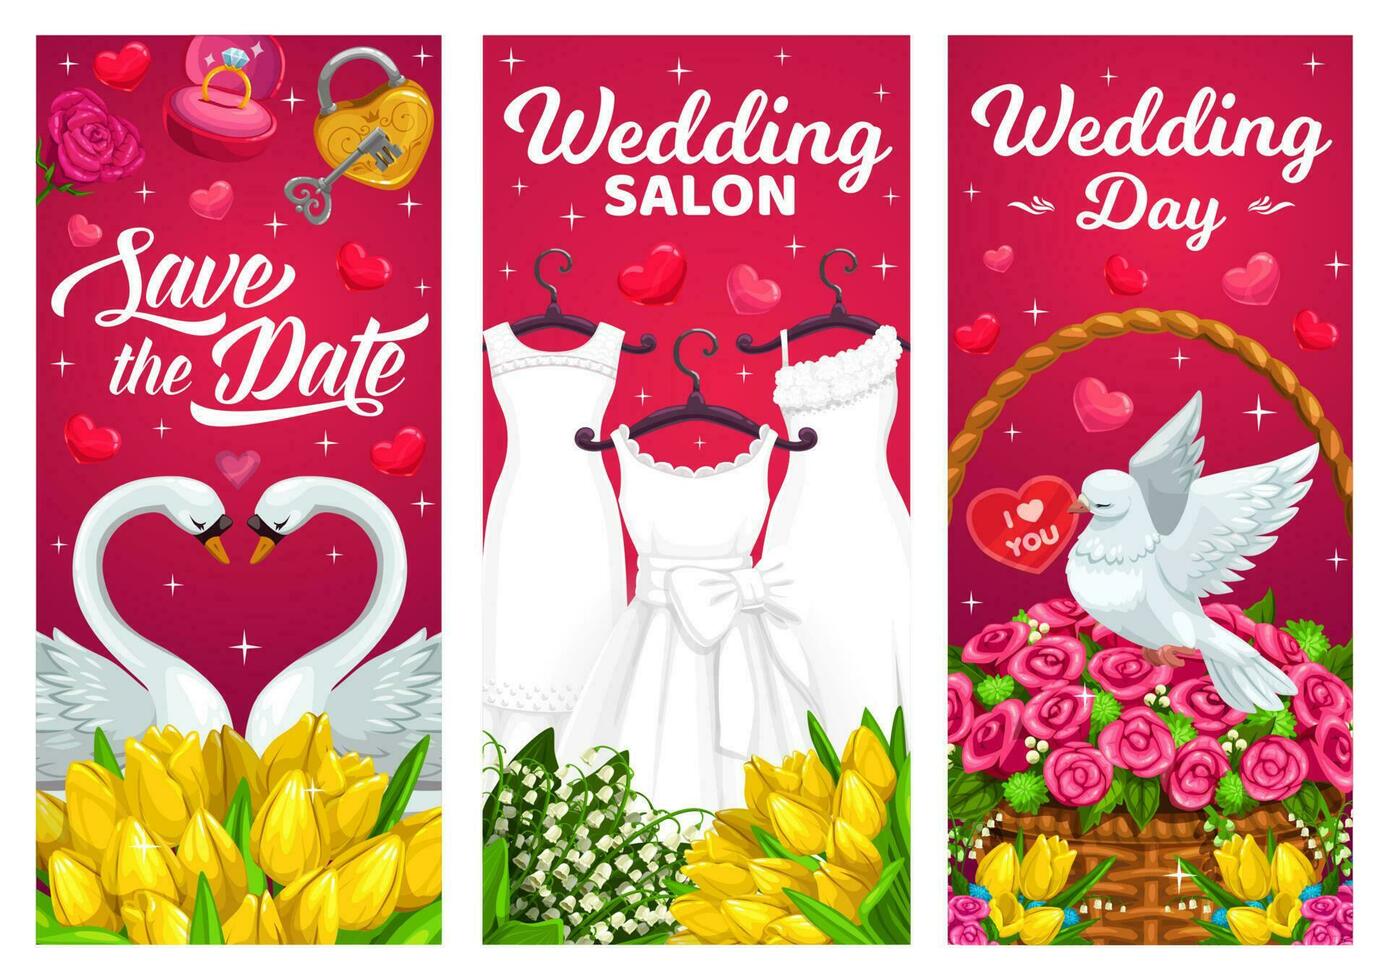 Wedding marriage banners bridal dress vector